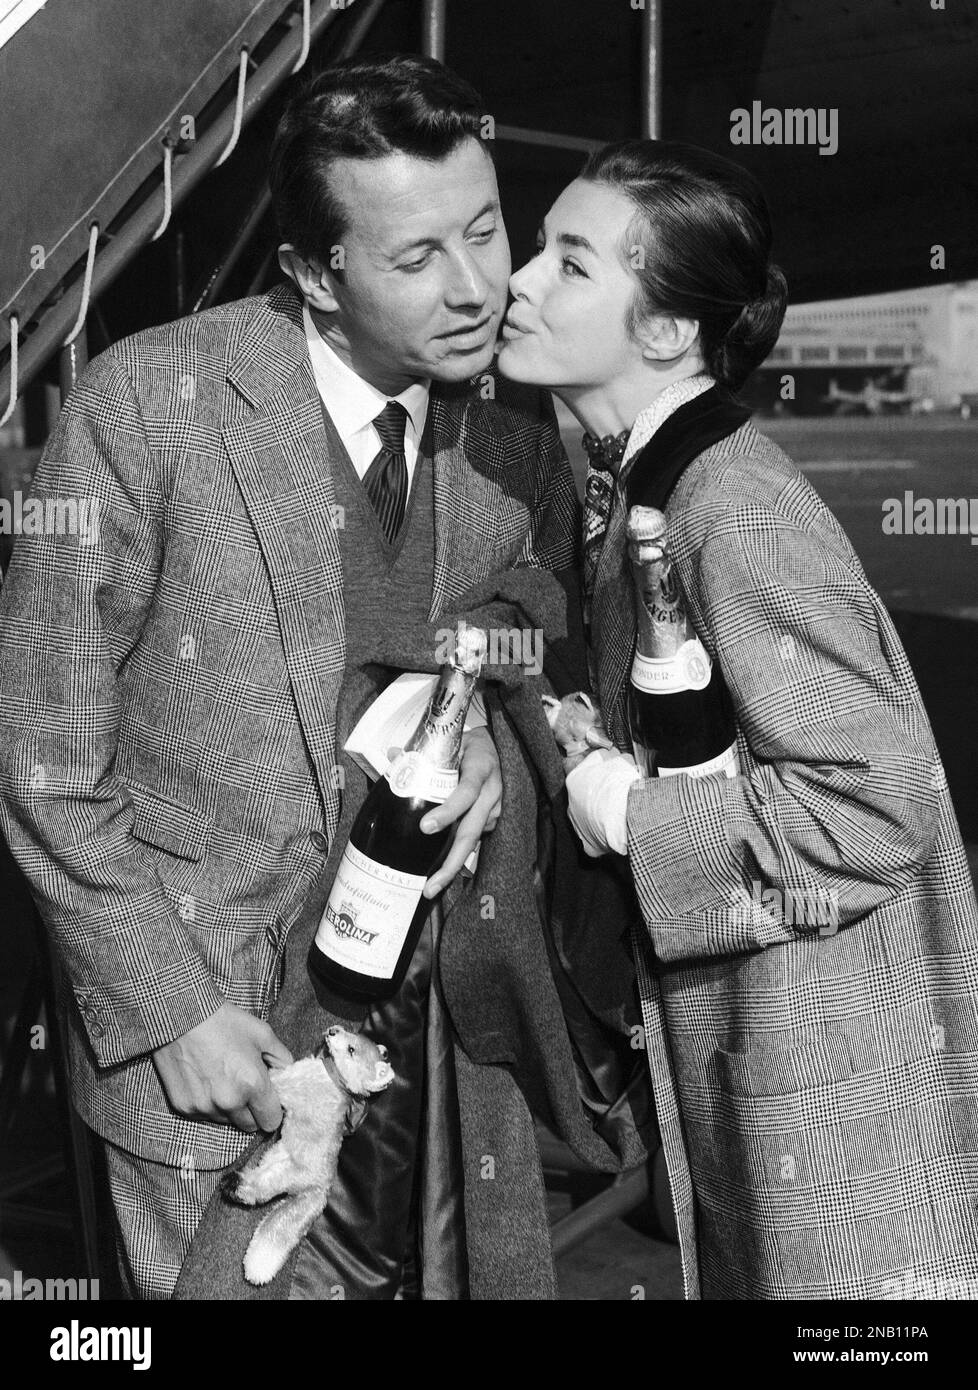 French actor Michel Auclair is greeted by German actress Marianne Koch upon his arrival on October 2, 1957 at the Tempelhof airport in Berlin, Germany image